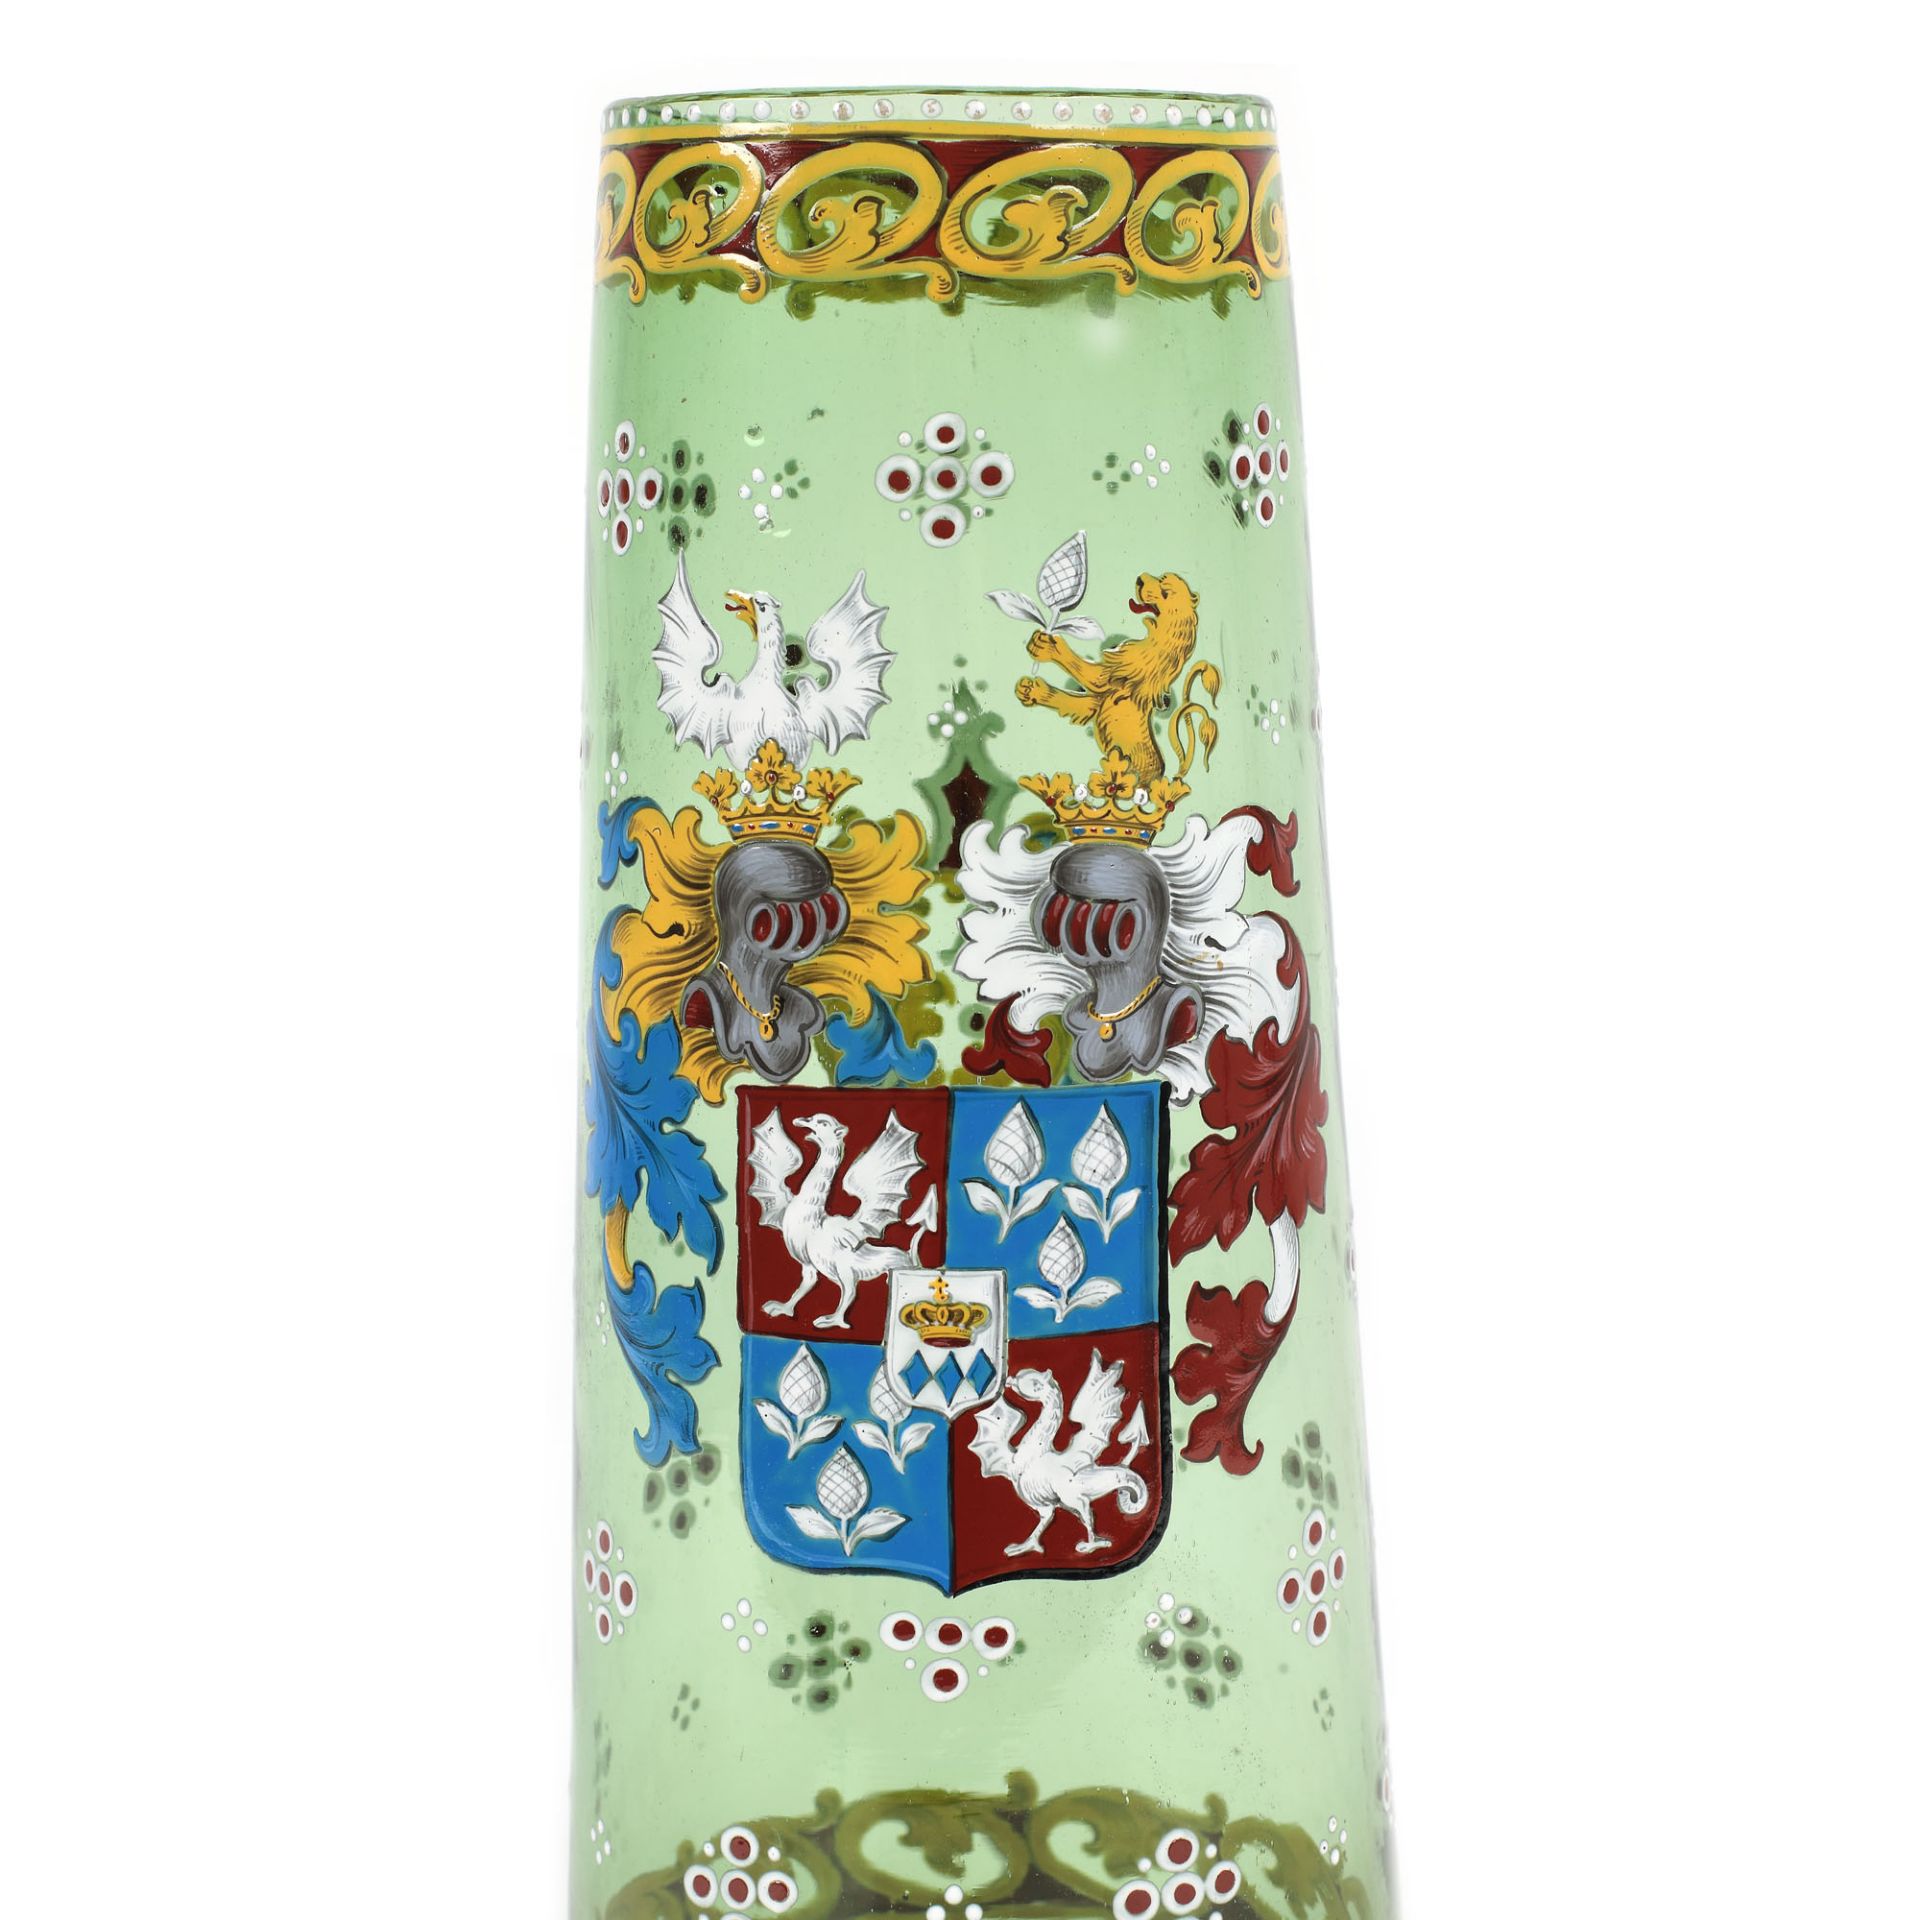 Bohemia workshop, Anton Egermann glass vessel, hand-painted, with coat of arms, approx. 1850 - Image 4 of 4